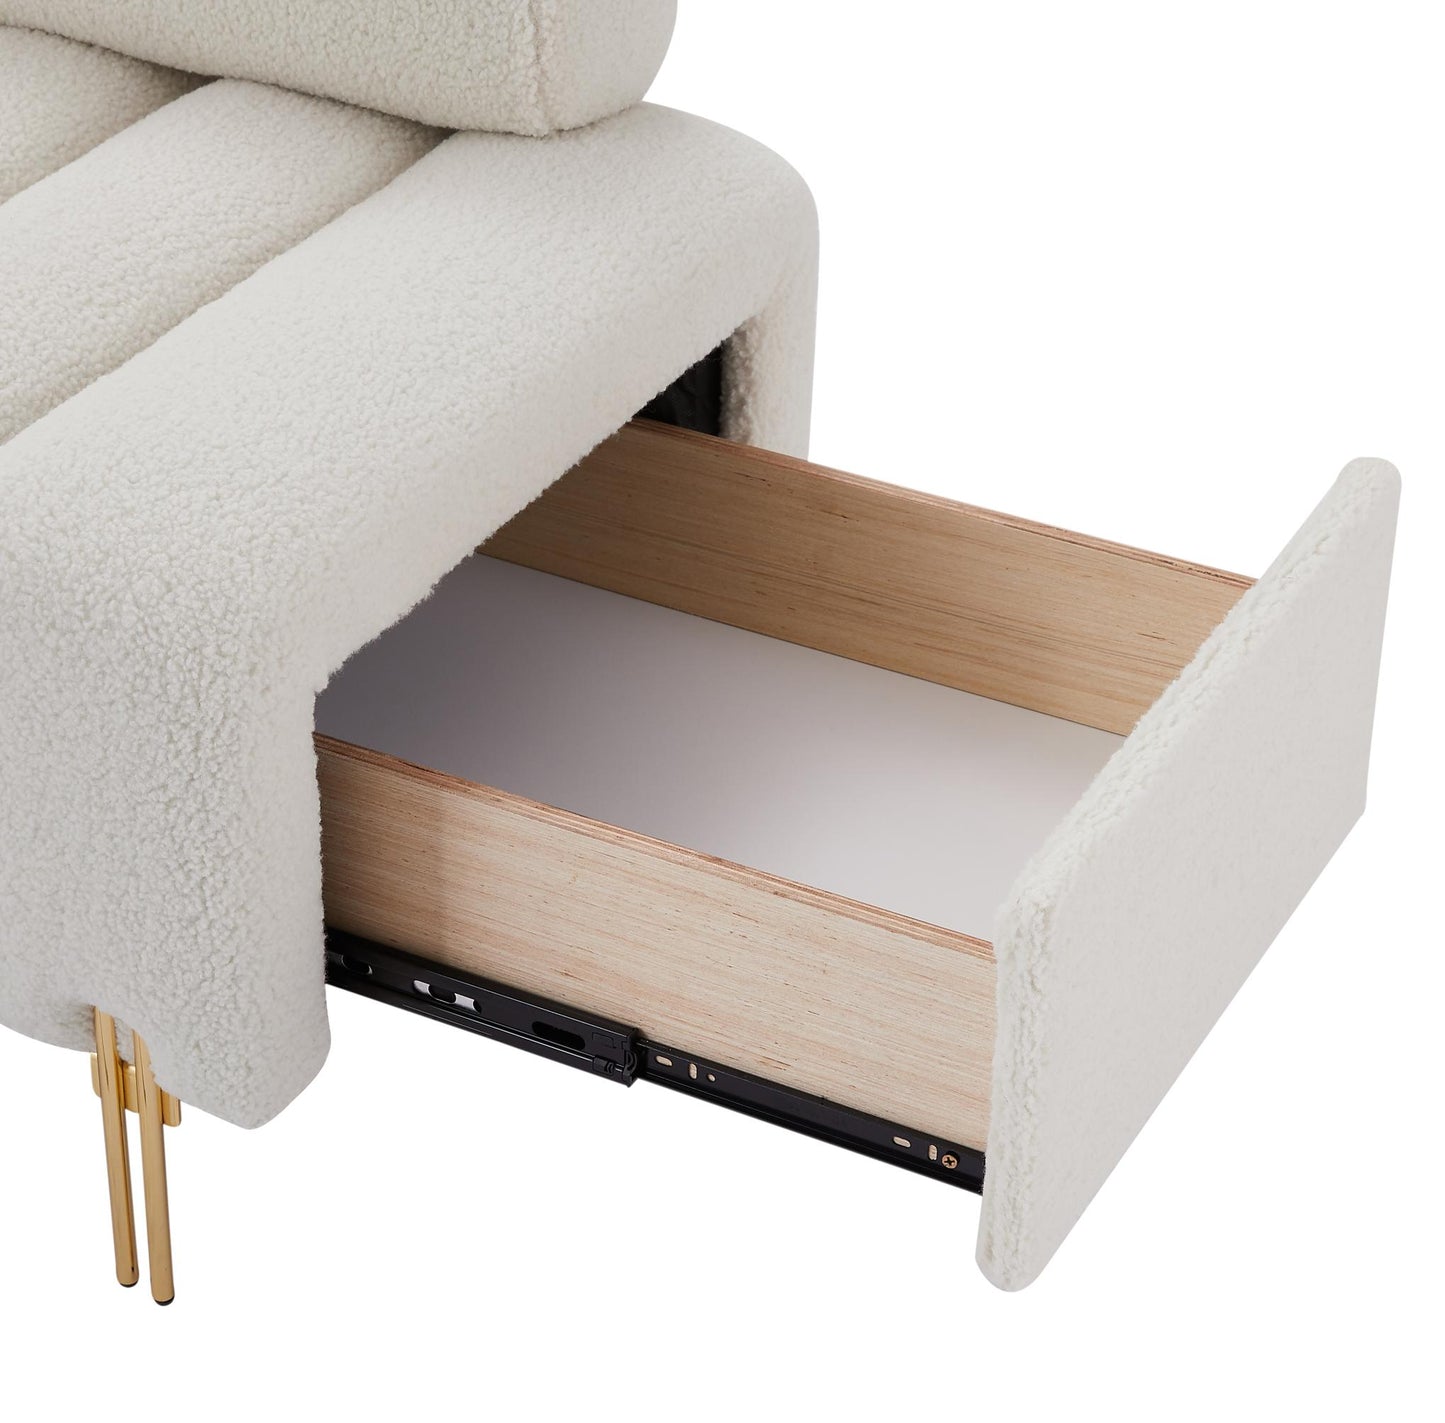 Modern End of Bed Bench Upholstered Teddy Entryway Ottoman Bench Fuzzy Sofa Stool Footrest Window Bench with Gold Metal Legs for Bedroom Apartments